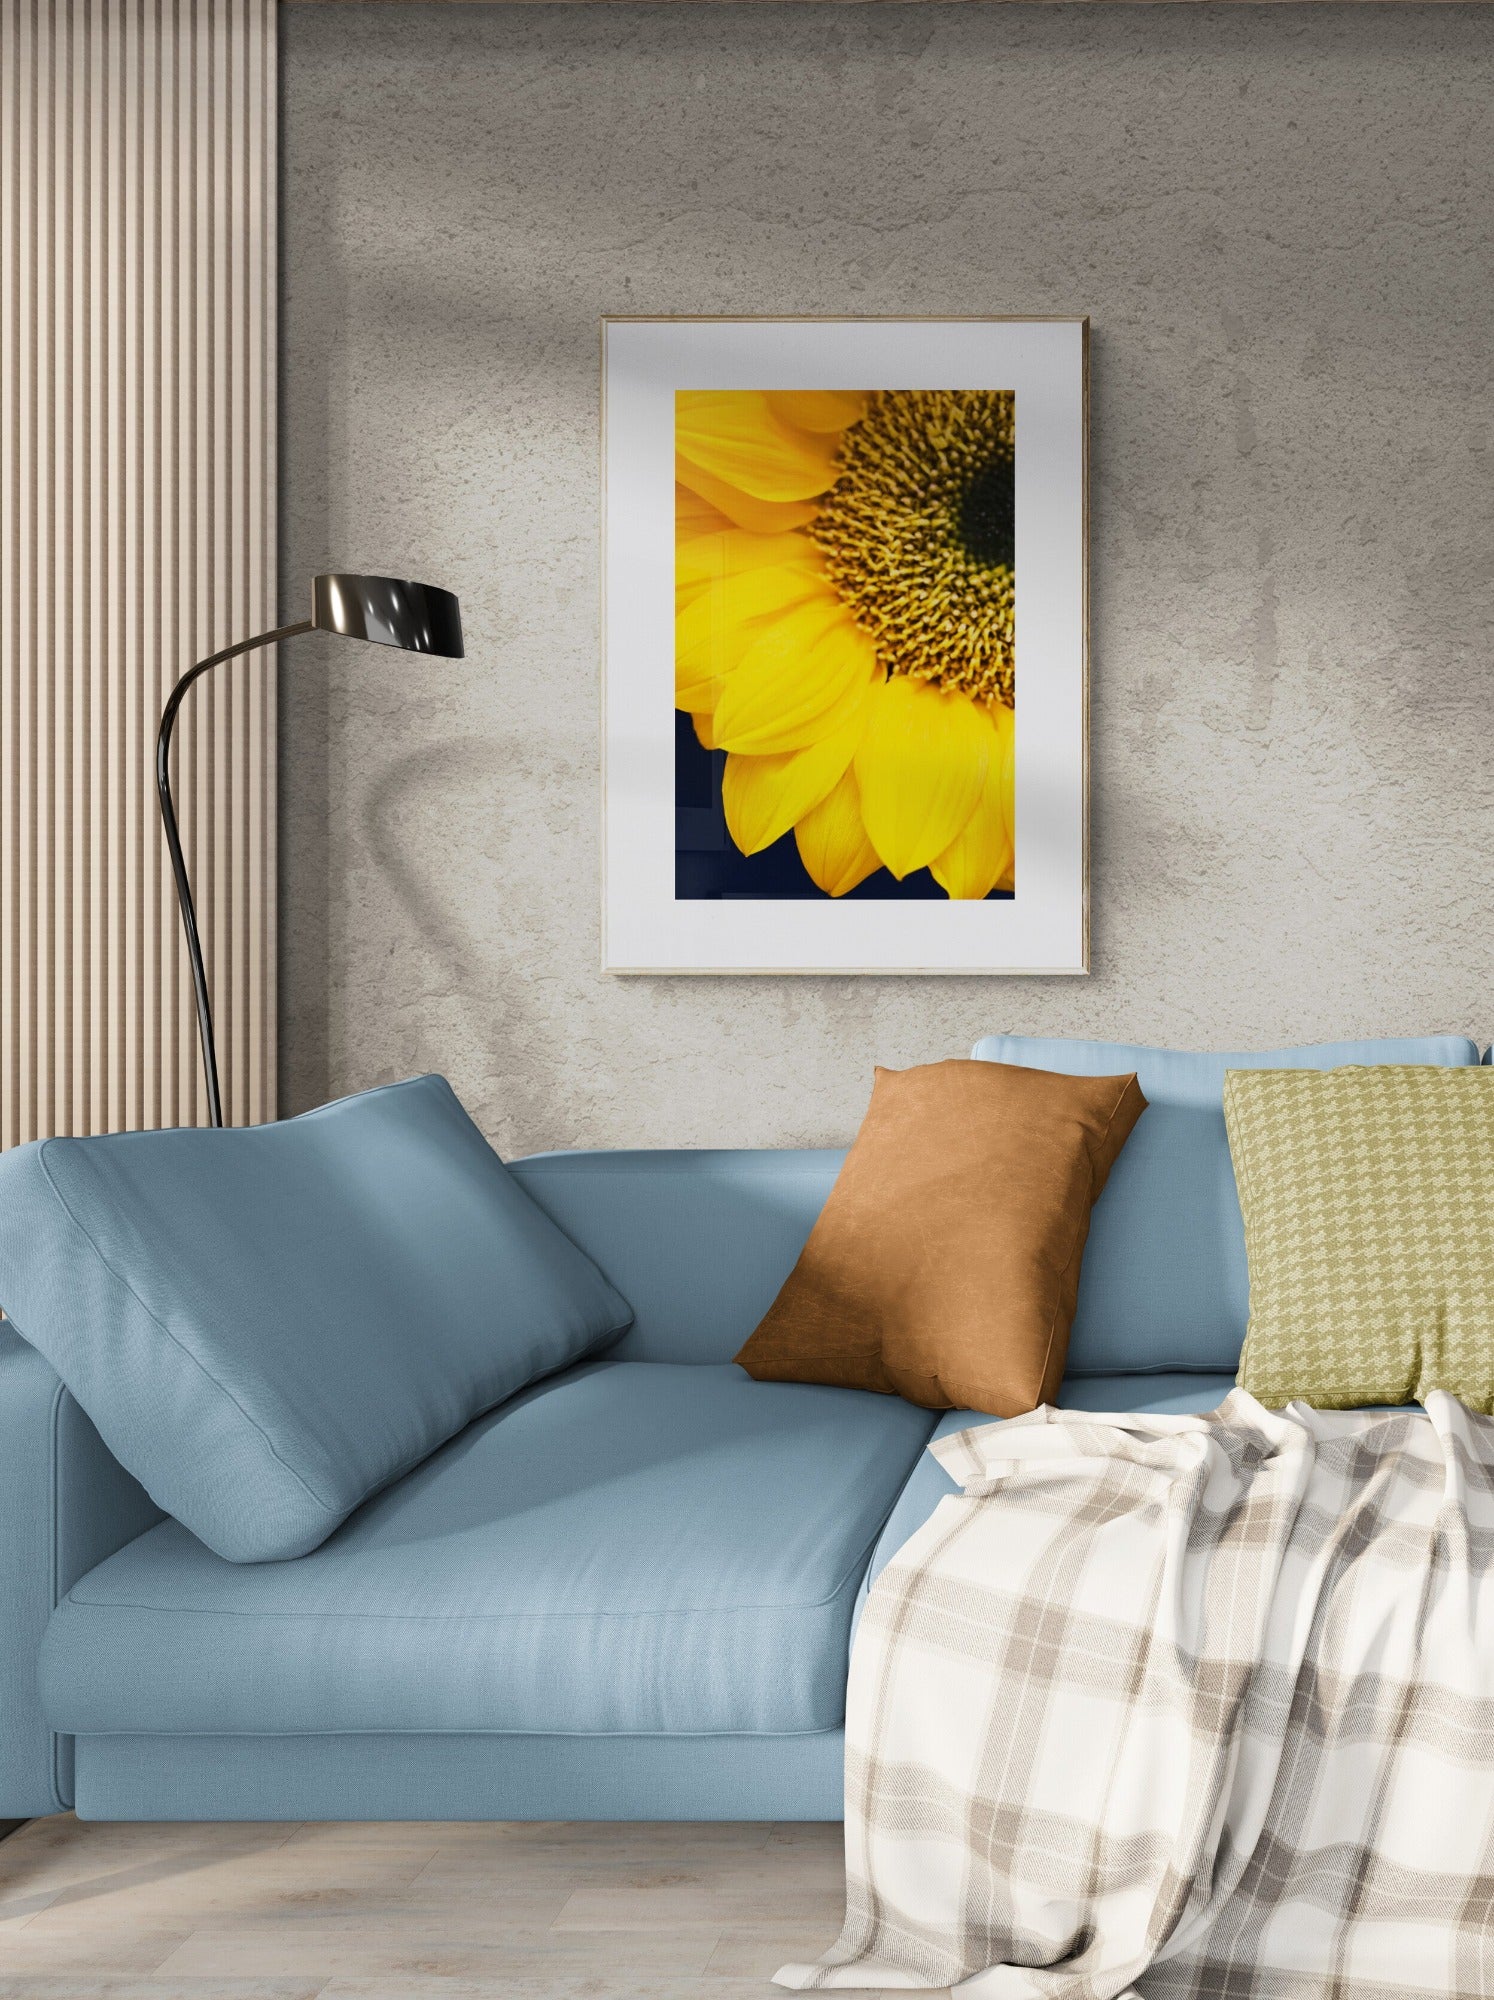 Abstract Close Up Photograph of a Sunflower as Wall Art in a Living Room